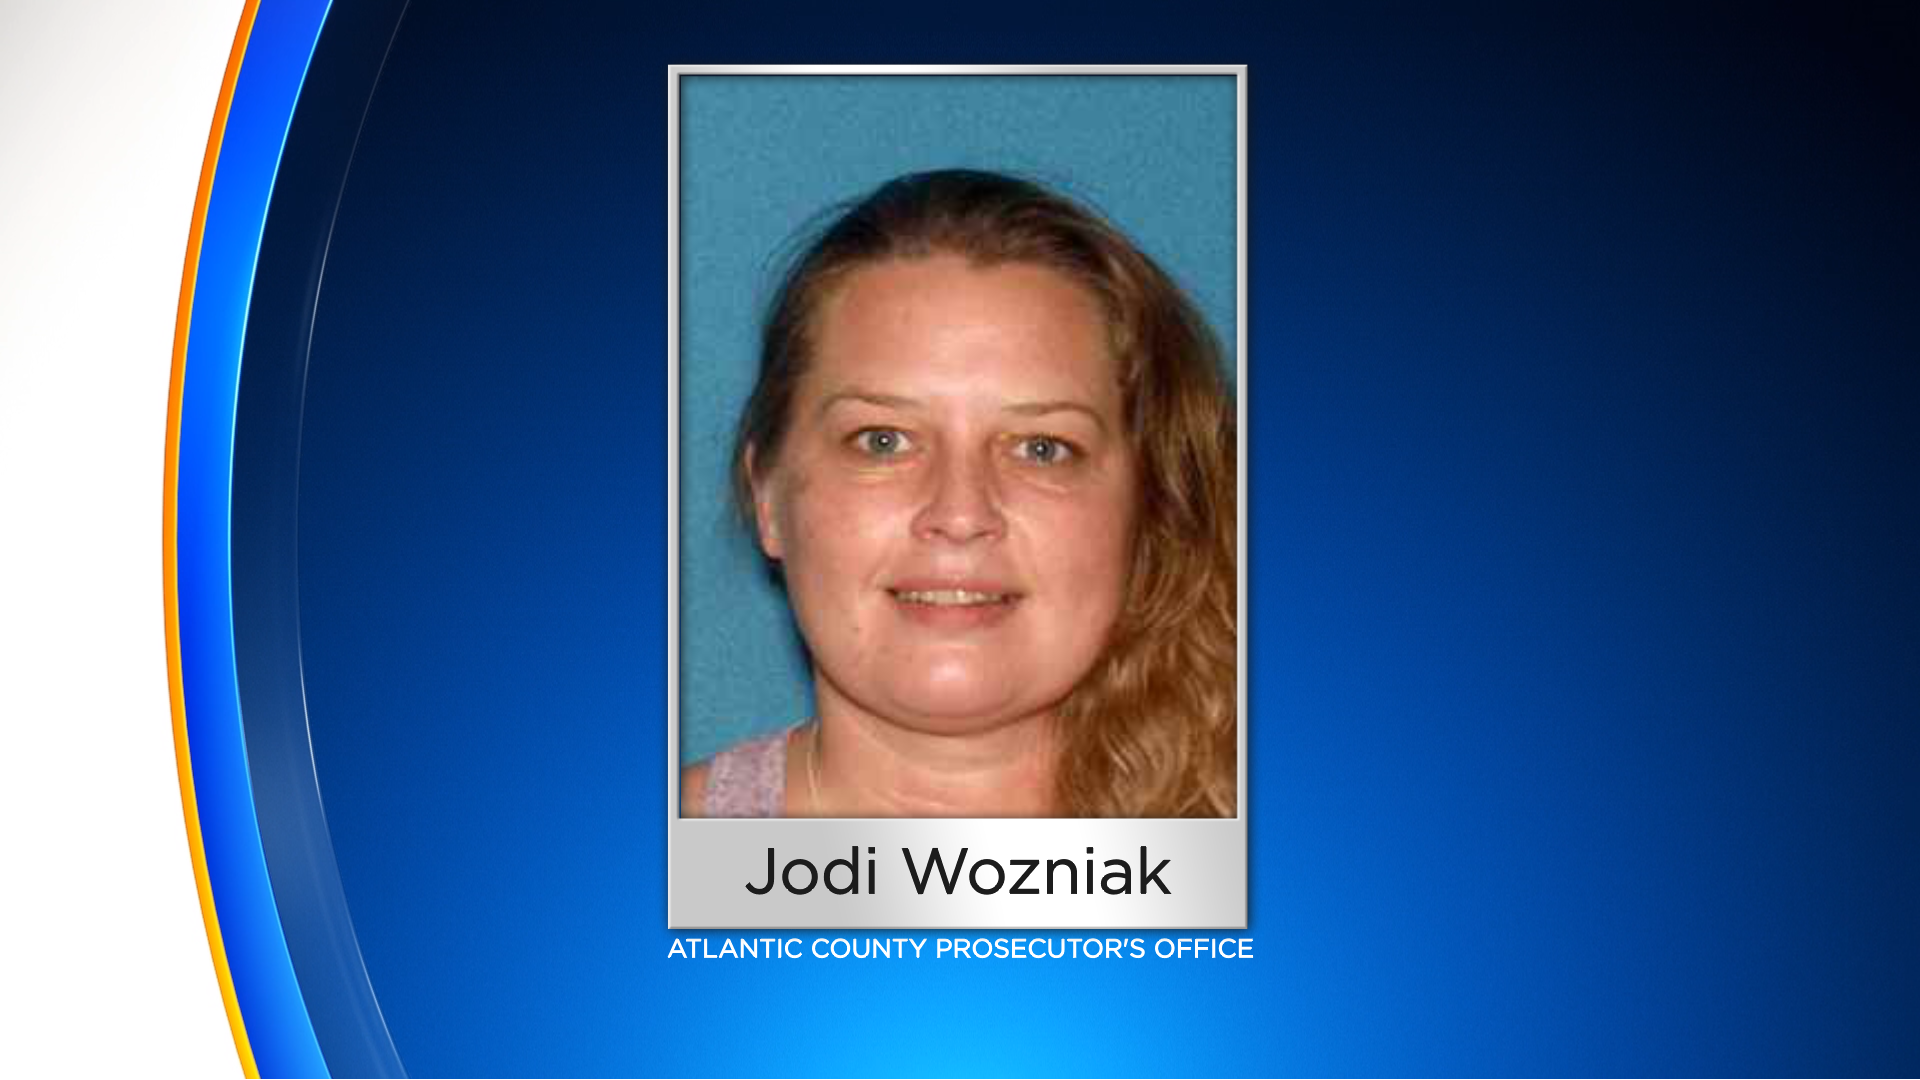 South Jersey Woman, Jodi Wozniak, Charged For Alleged Multiple Counts Of Animal Cruelty